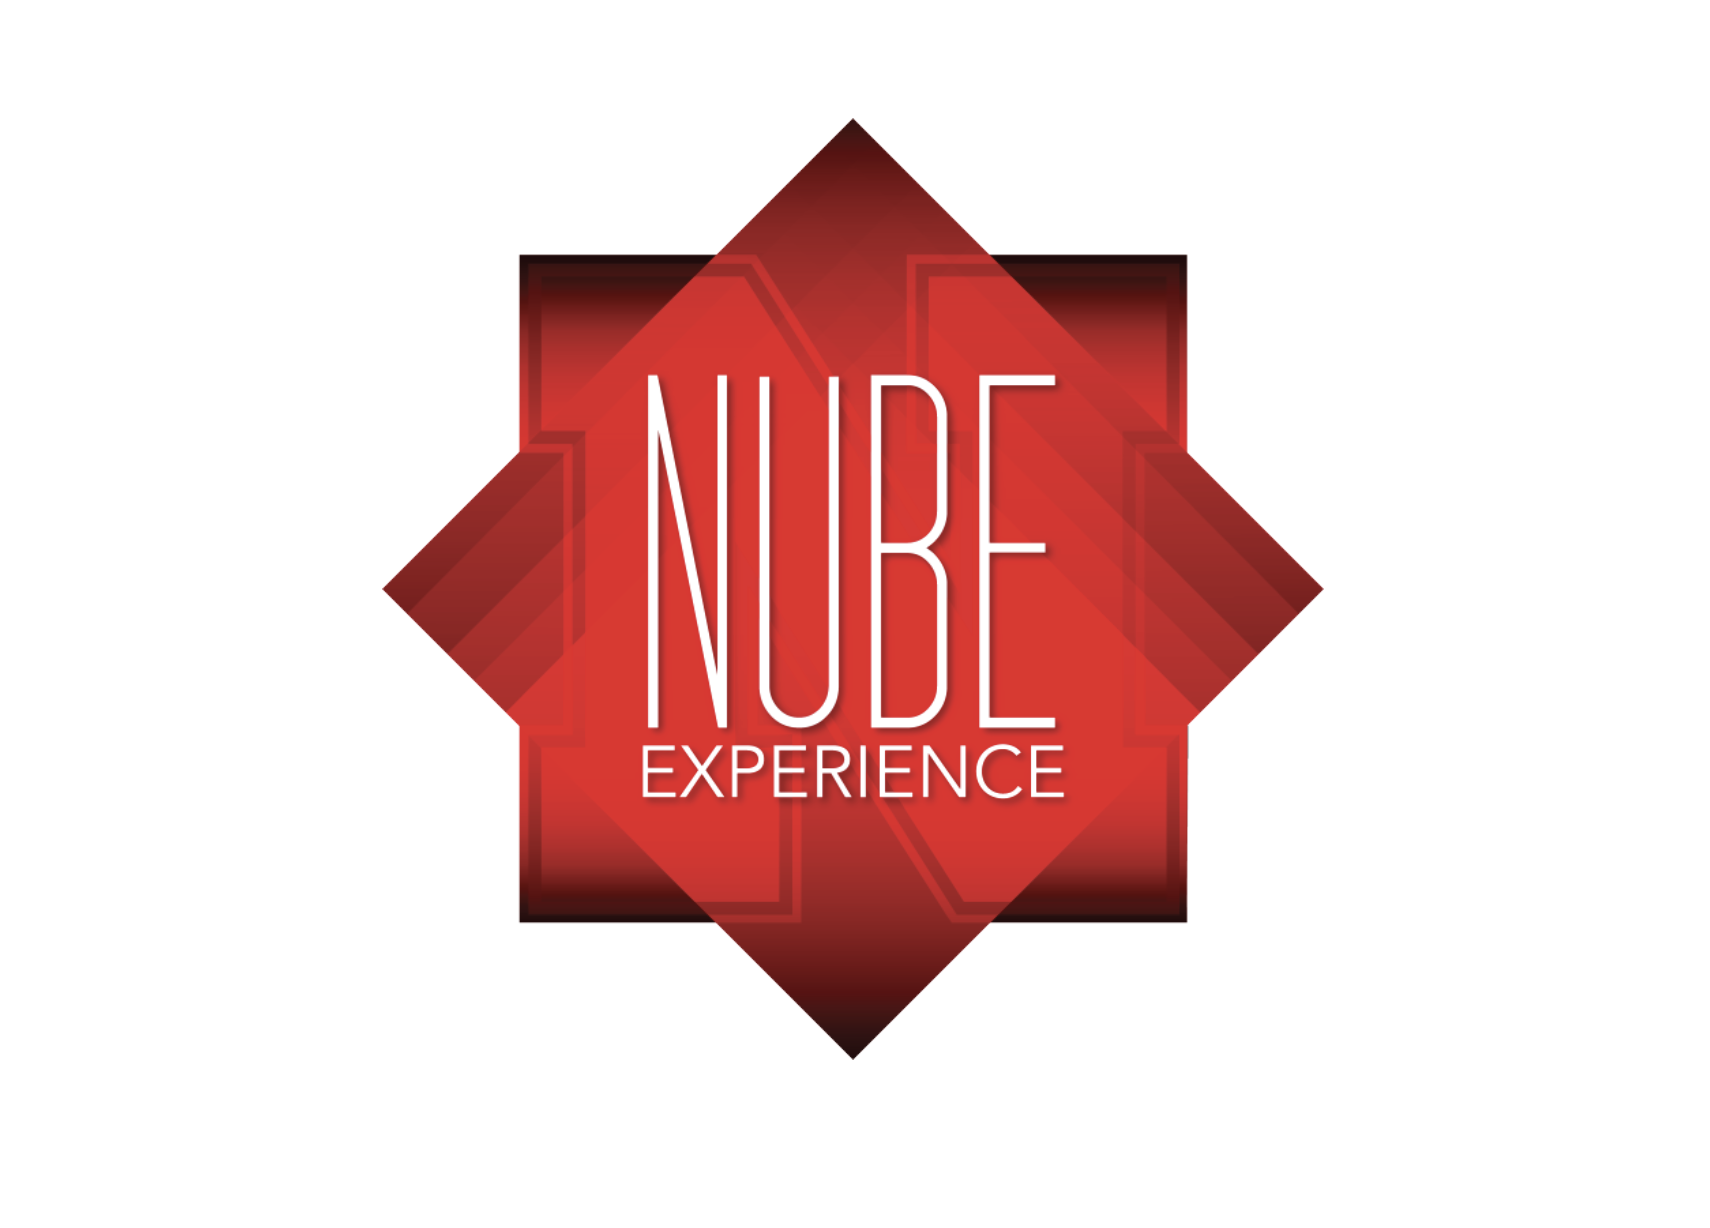 The NUBE Experience